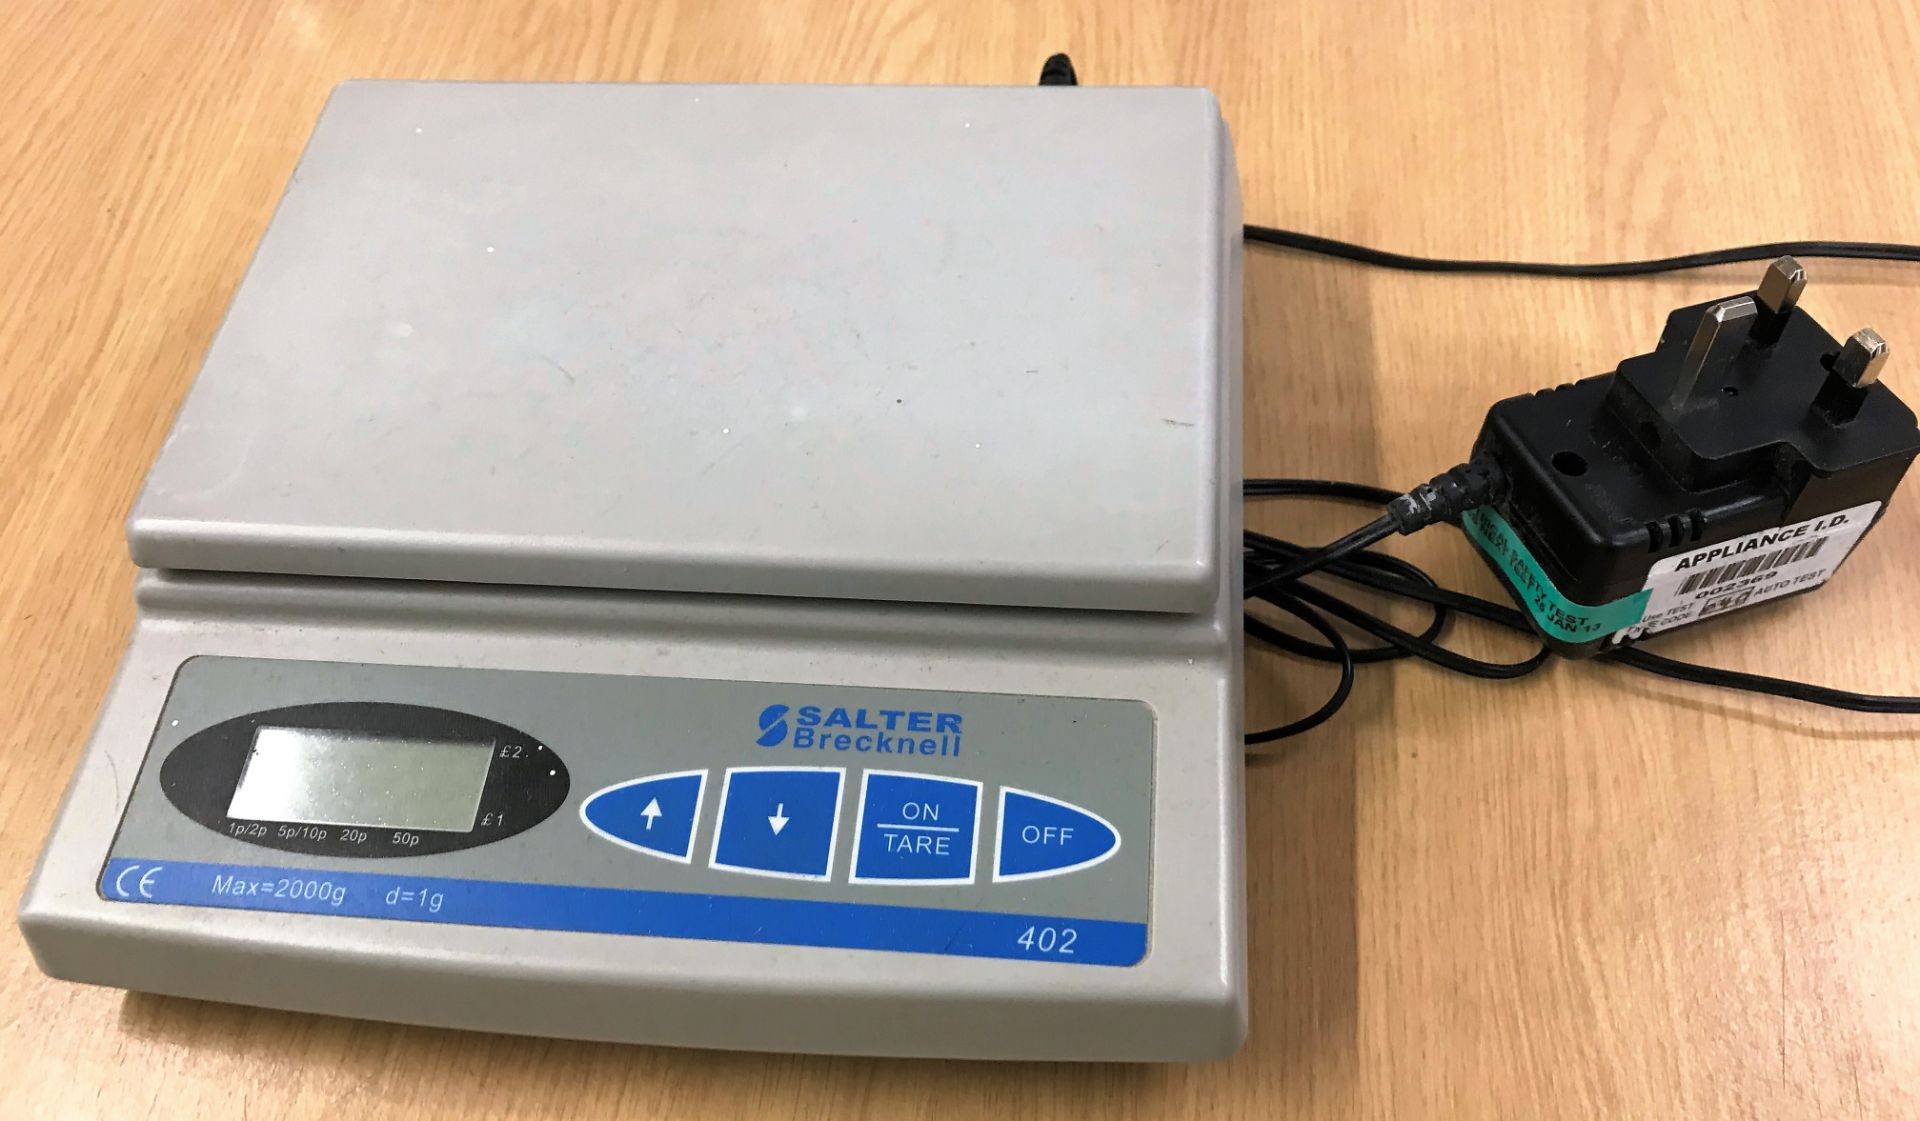 A Set of Salter Brecknell 402 Electronic Bench Scales.